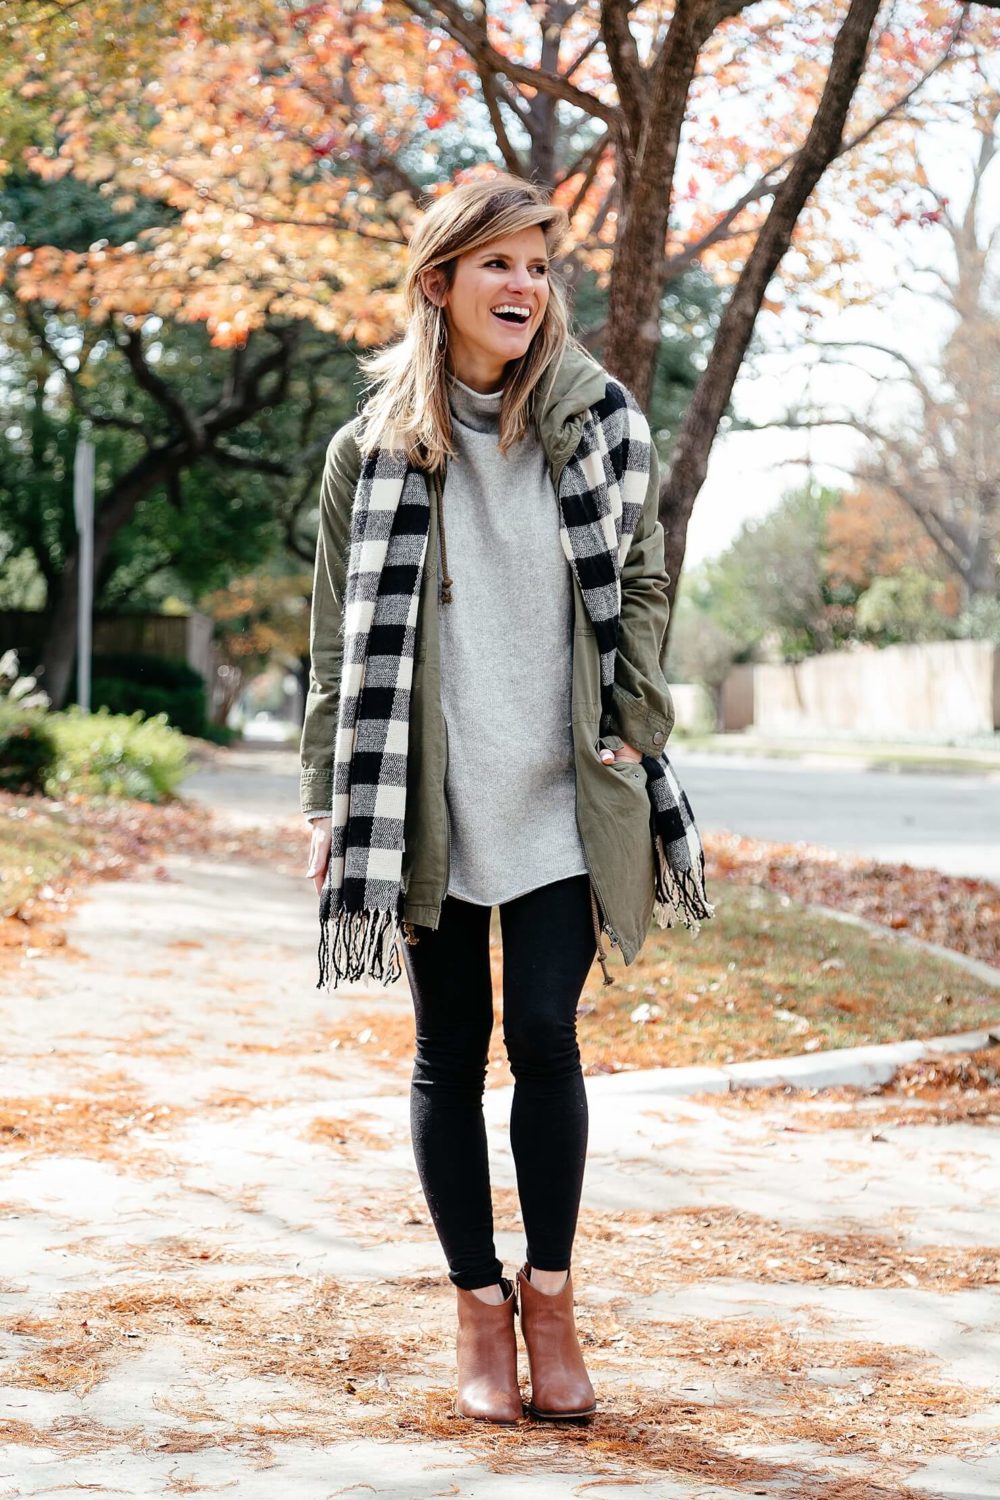 tunic sweater with leggings and brown booties paired with green utility jacket and buffalo check scarf